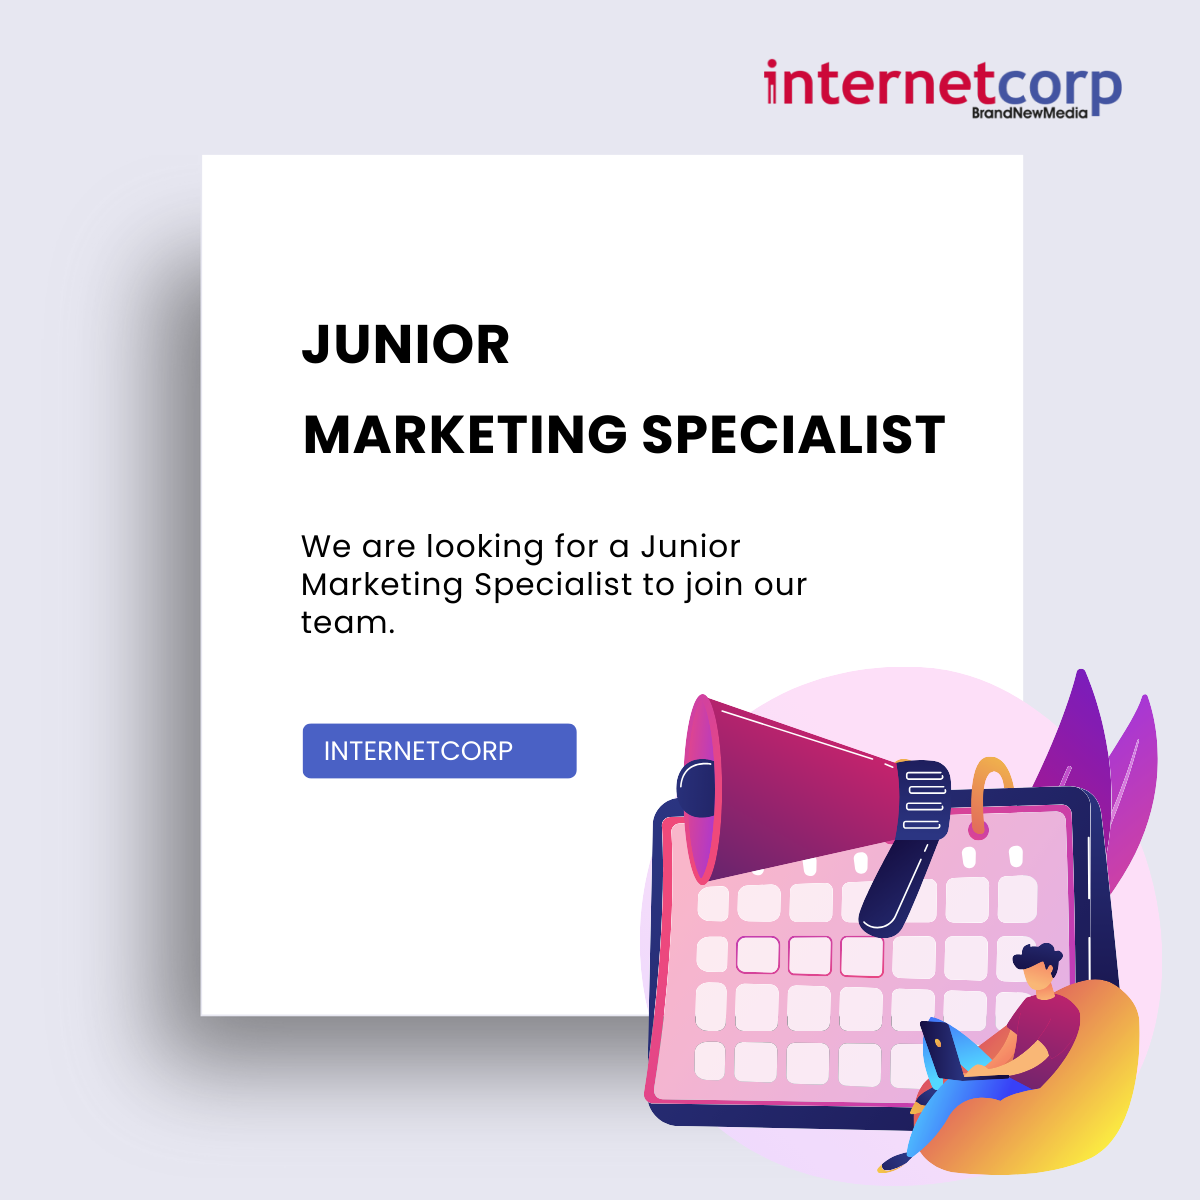 We are looking for Junior Marketing Specialist